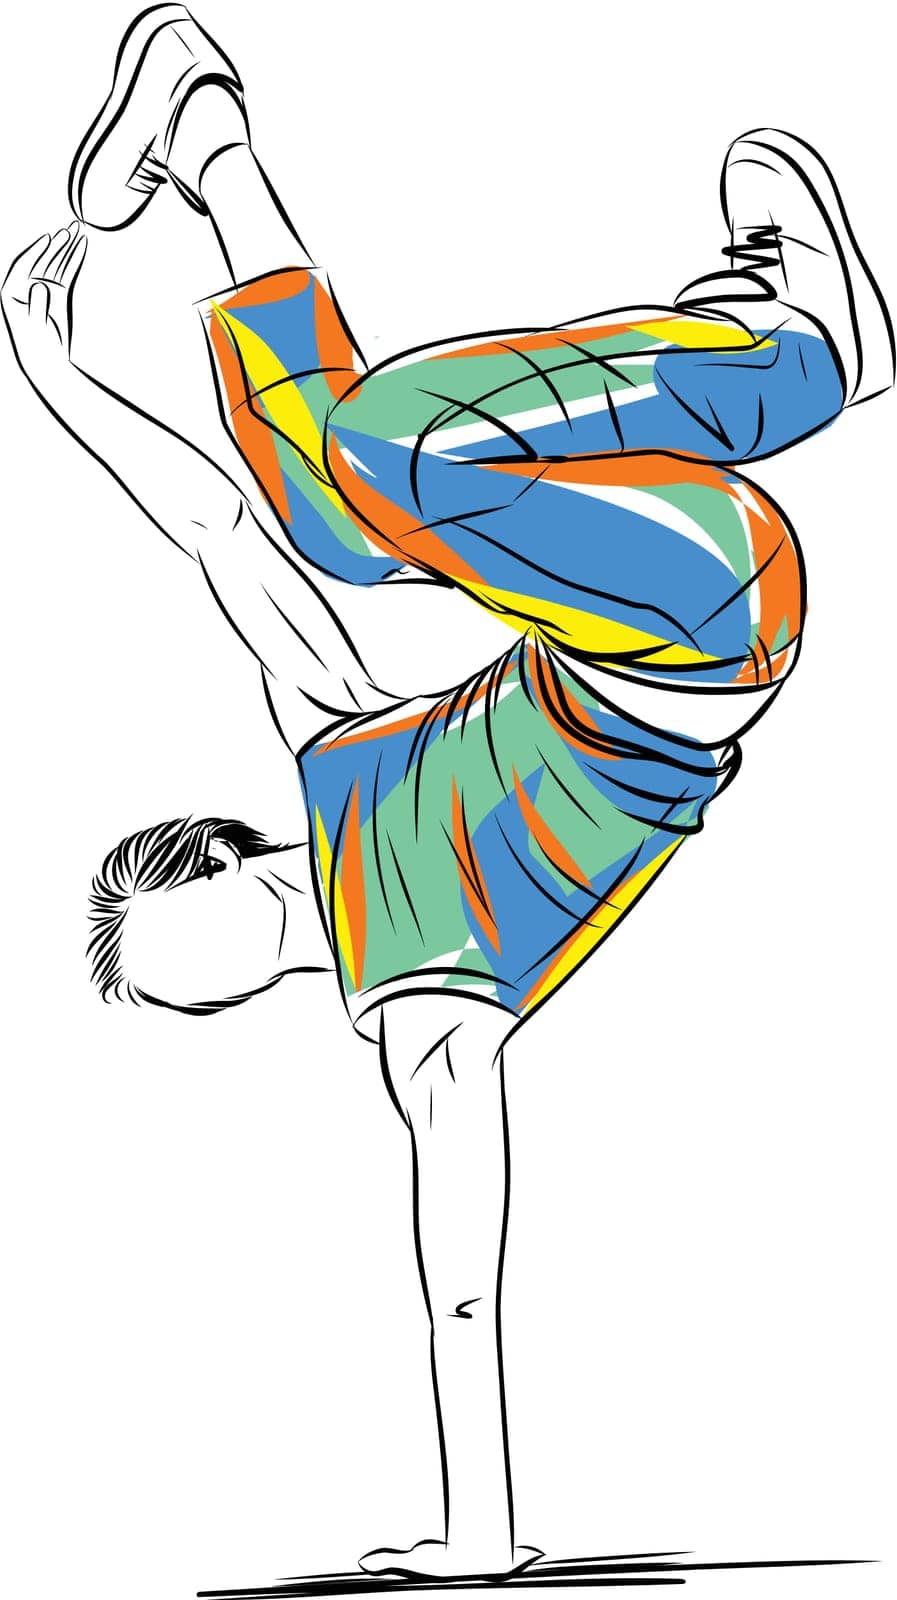 Man dancer do hip hop breakdance hand stand vector illustration. Dancer perform hiphop. Performer in freestyle street dance. Modern, contemporary movements for urban party.